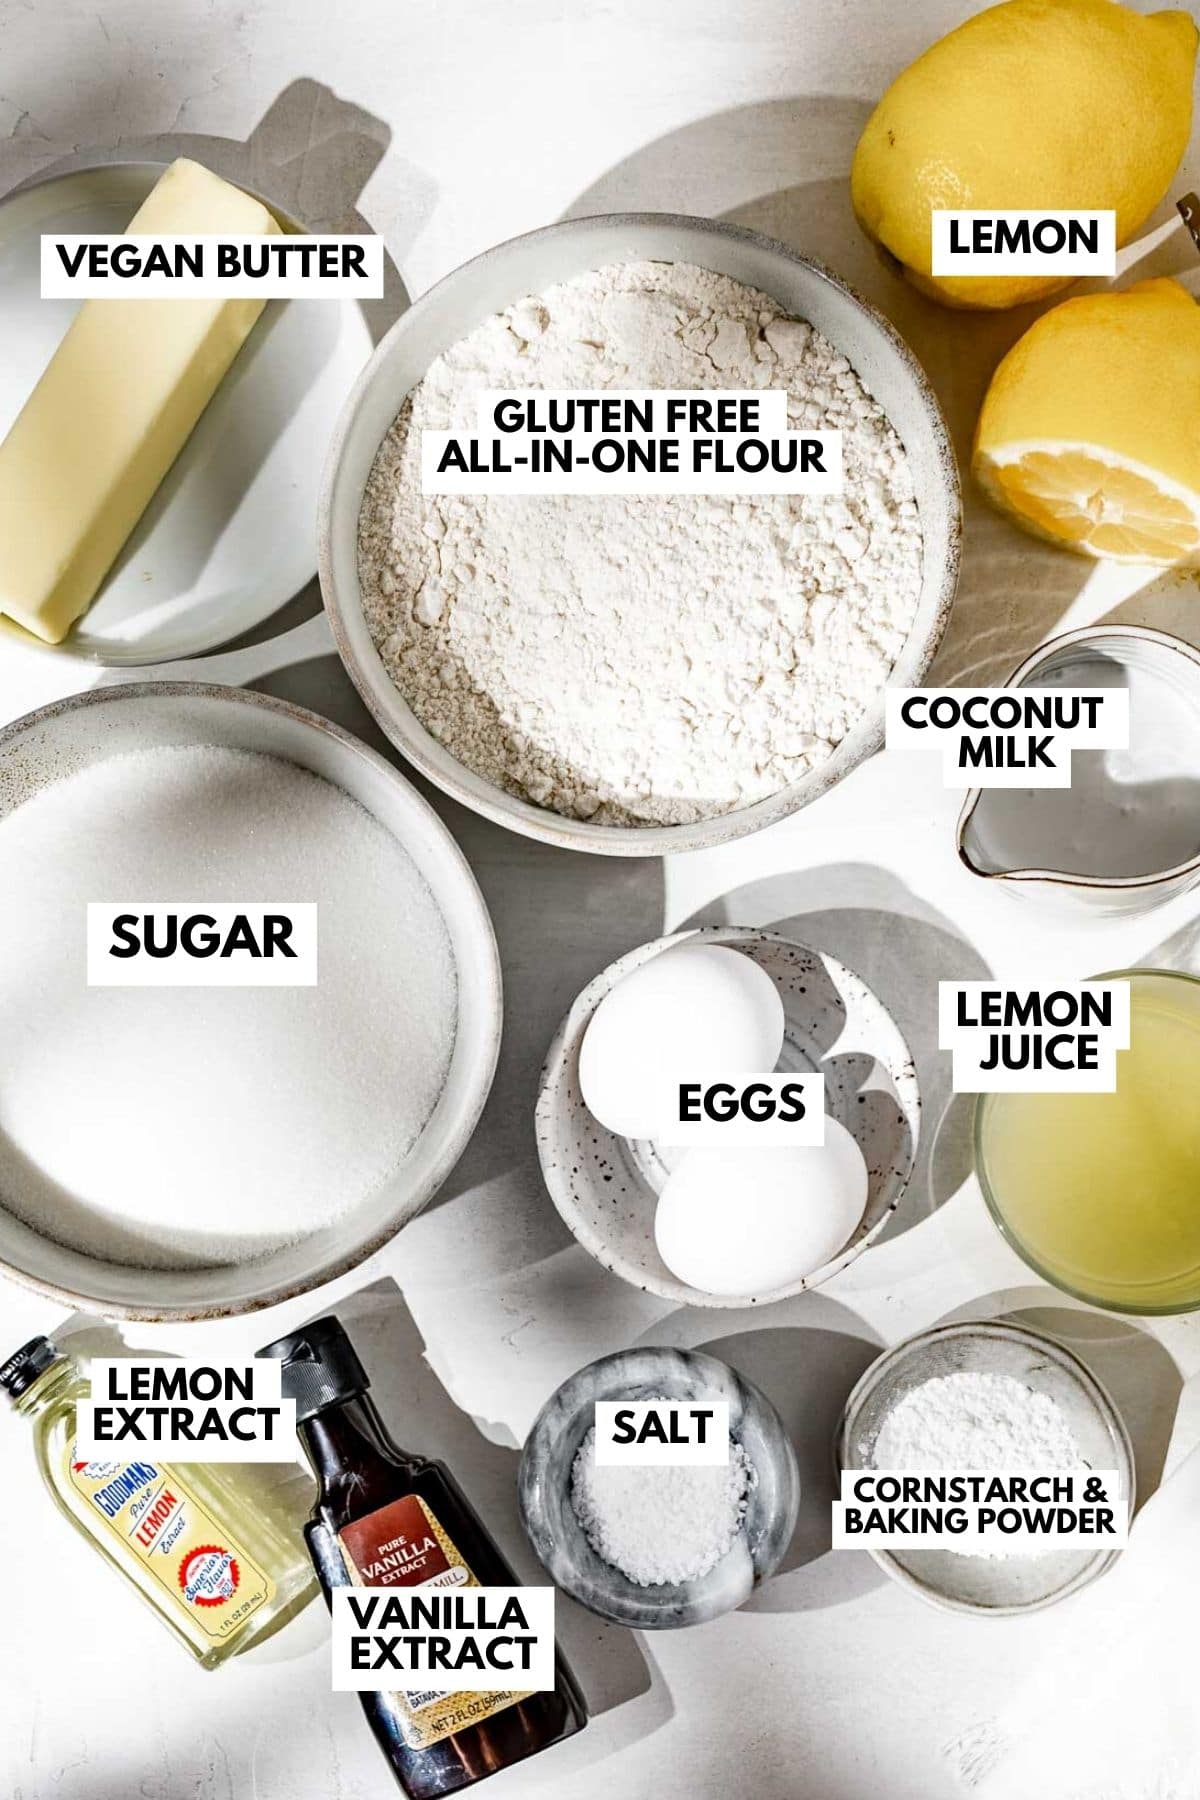 recipe ingredients in small nesting bowls and labeled